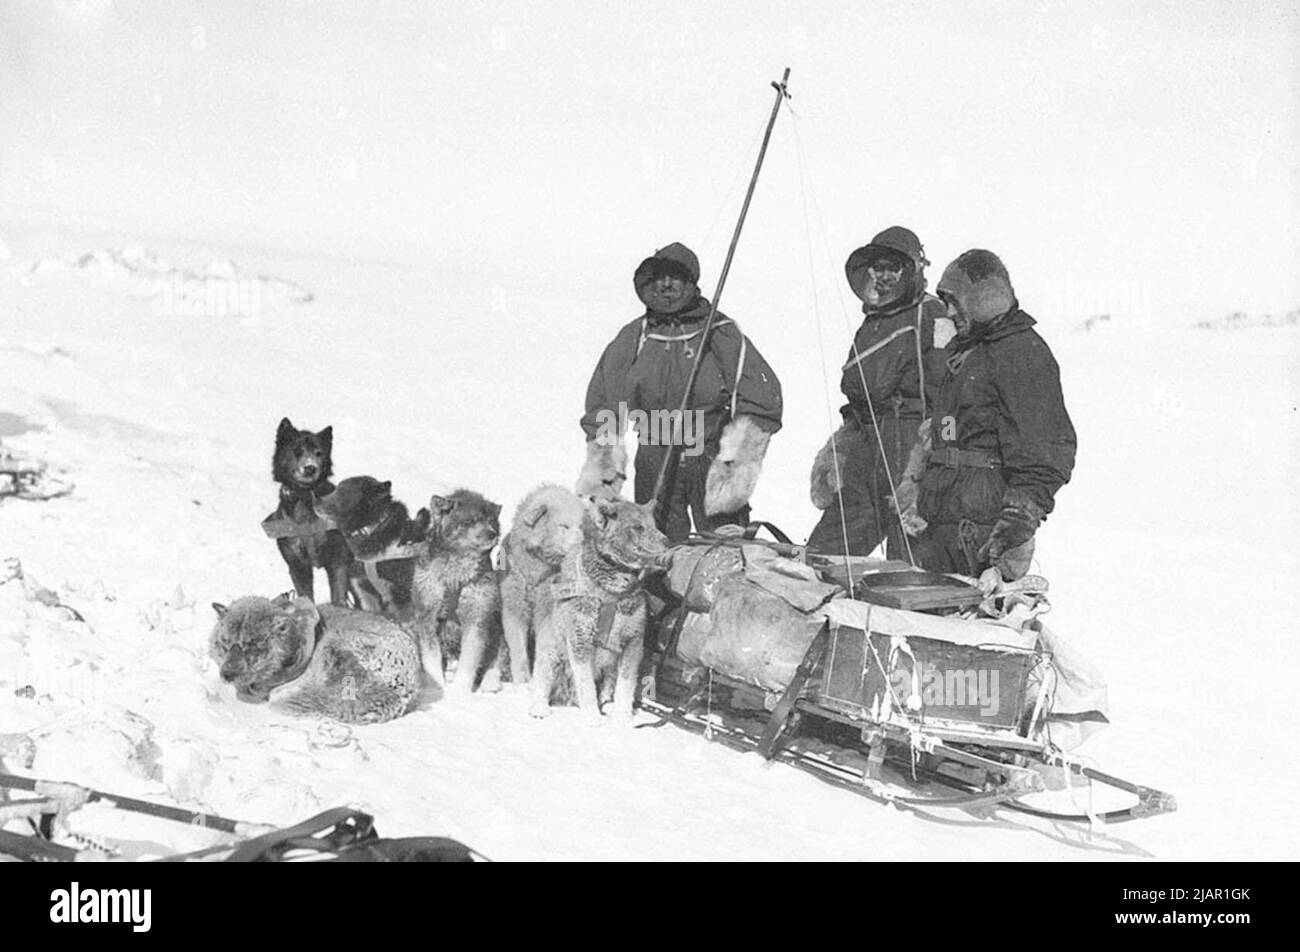 Xavier Mertz, Belgrave Edward Sutton Ninnis and Herbert Murphy, en route to the Aladdin's Cave depot with dogs during the Australasian Antarctic Expedition ca.  1912 Stock Photo